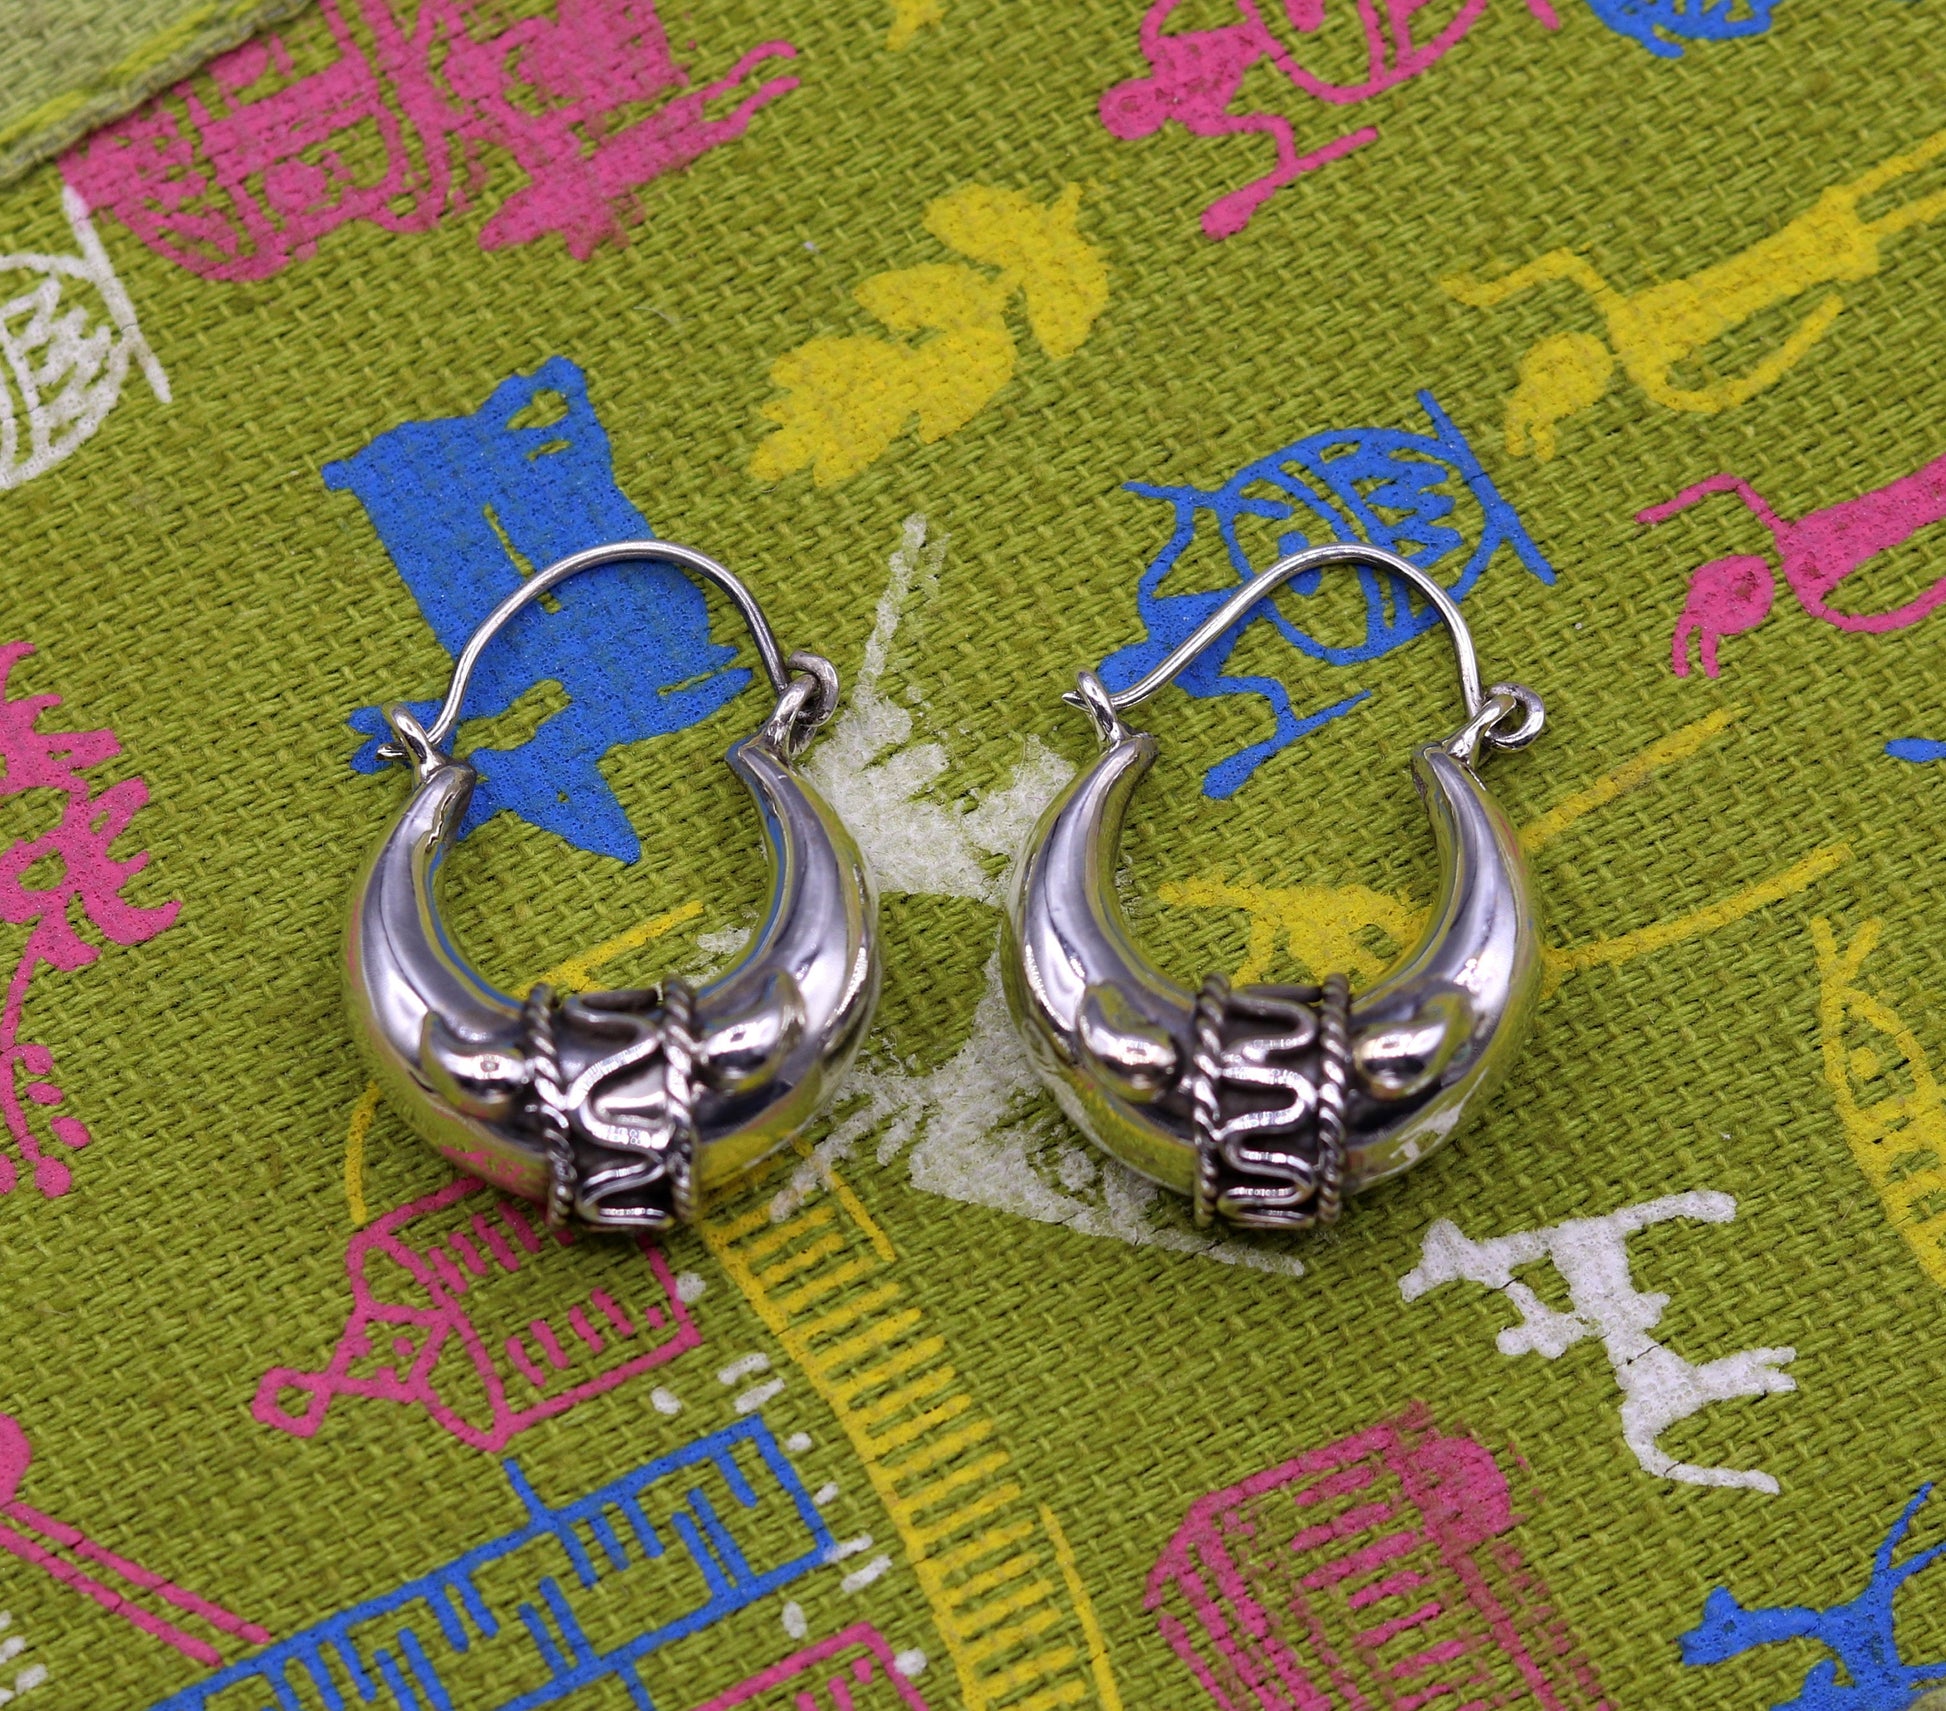 925 sterling pure silver handmade vintage style fabulous unisex hoops earrings kundal, ethnic bali tribal jewelry from india s586 - TRIBAL ORNAMENTS